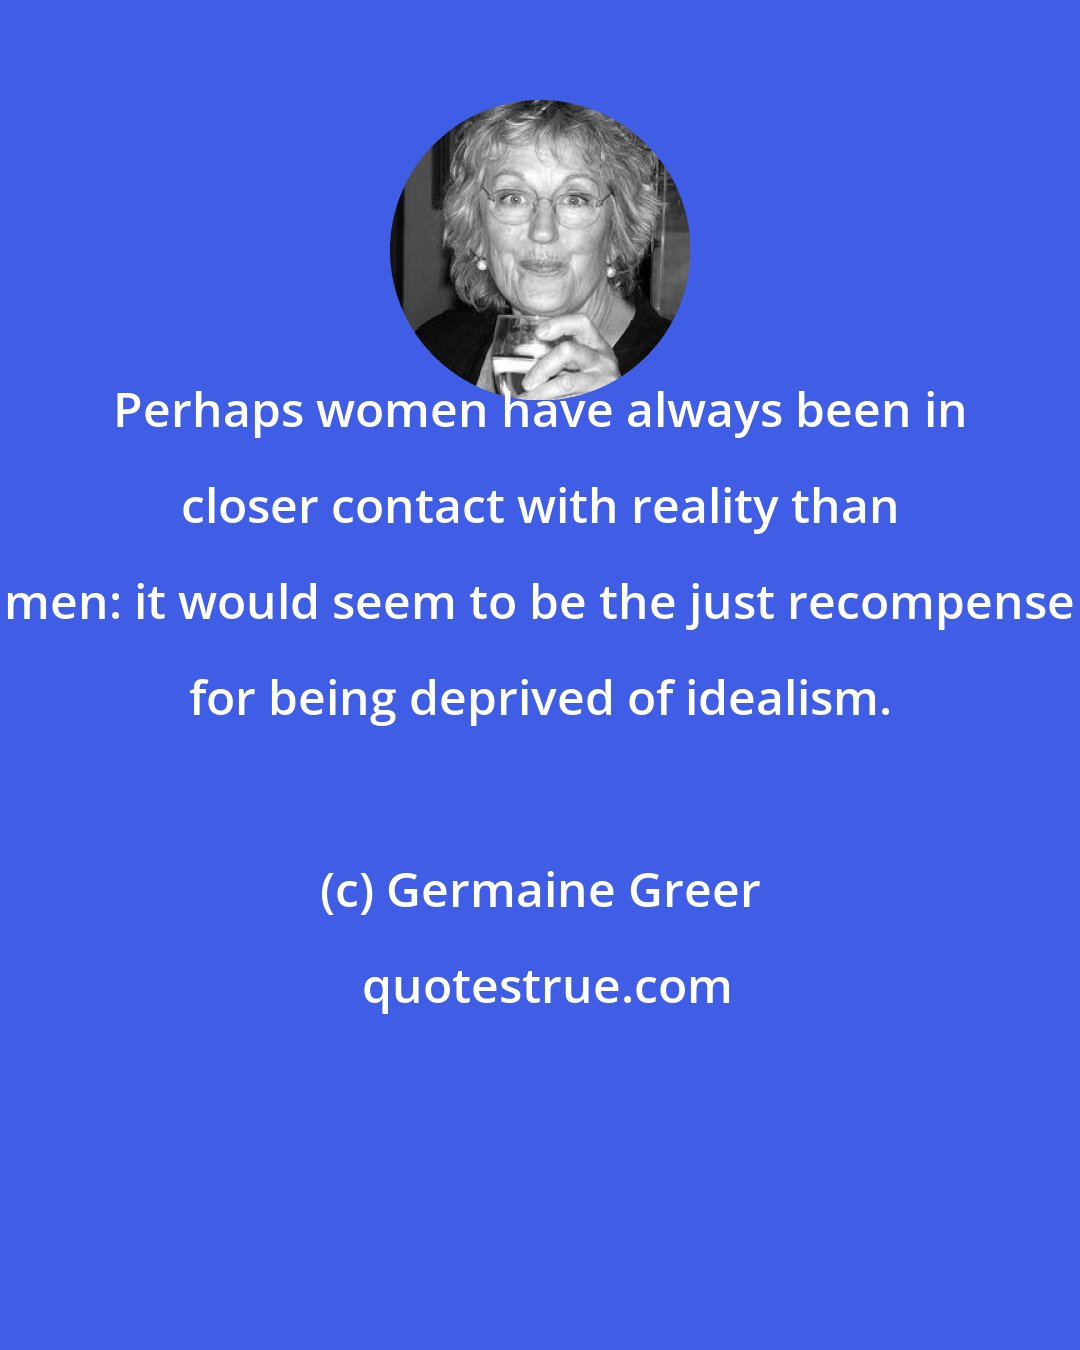 Germaine Greer: Perhaps women have always been in closer contact with reality than men: it would seem to be the just recompense for being deprived of idealism.